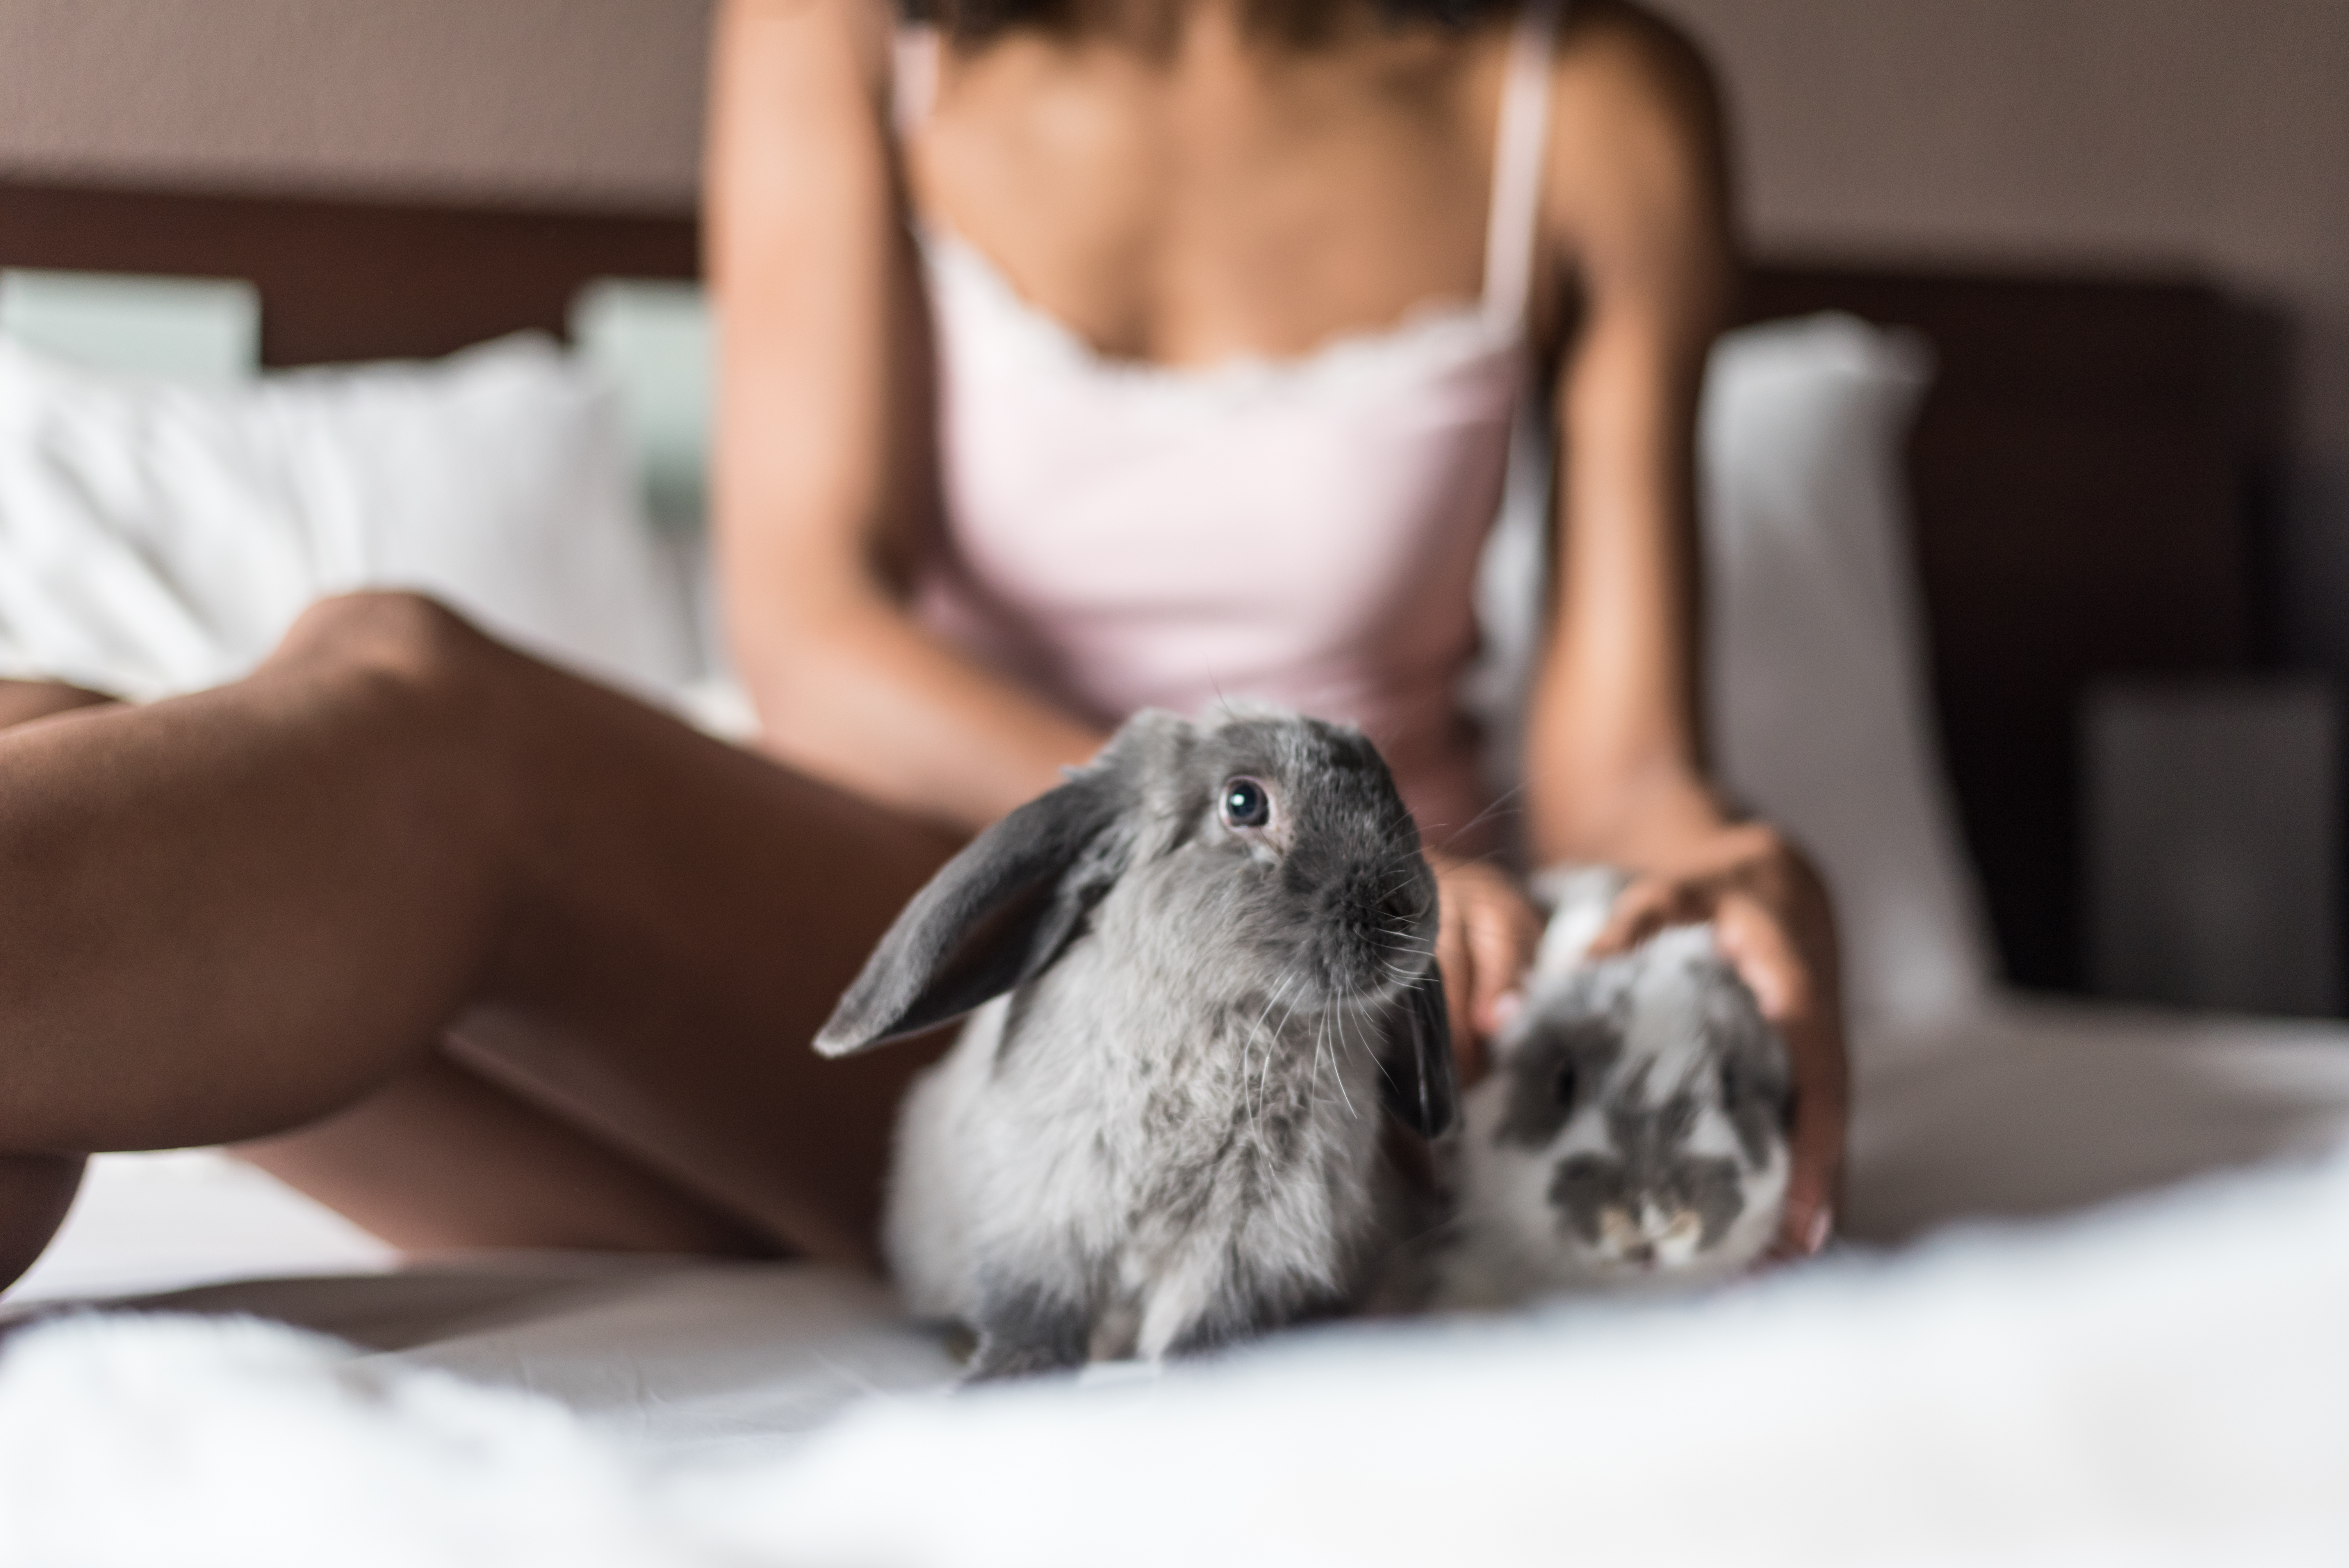 rabbits could help explain the female orgasm.